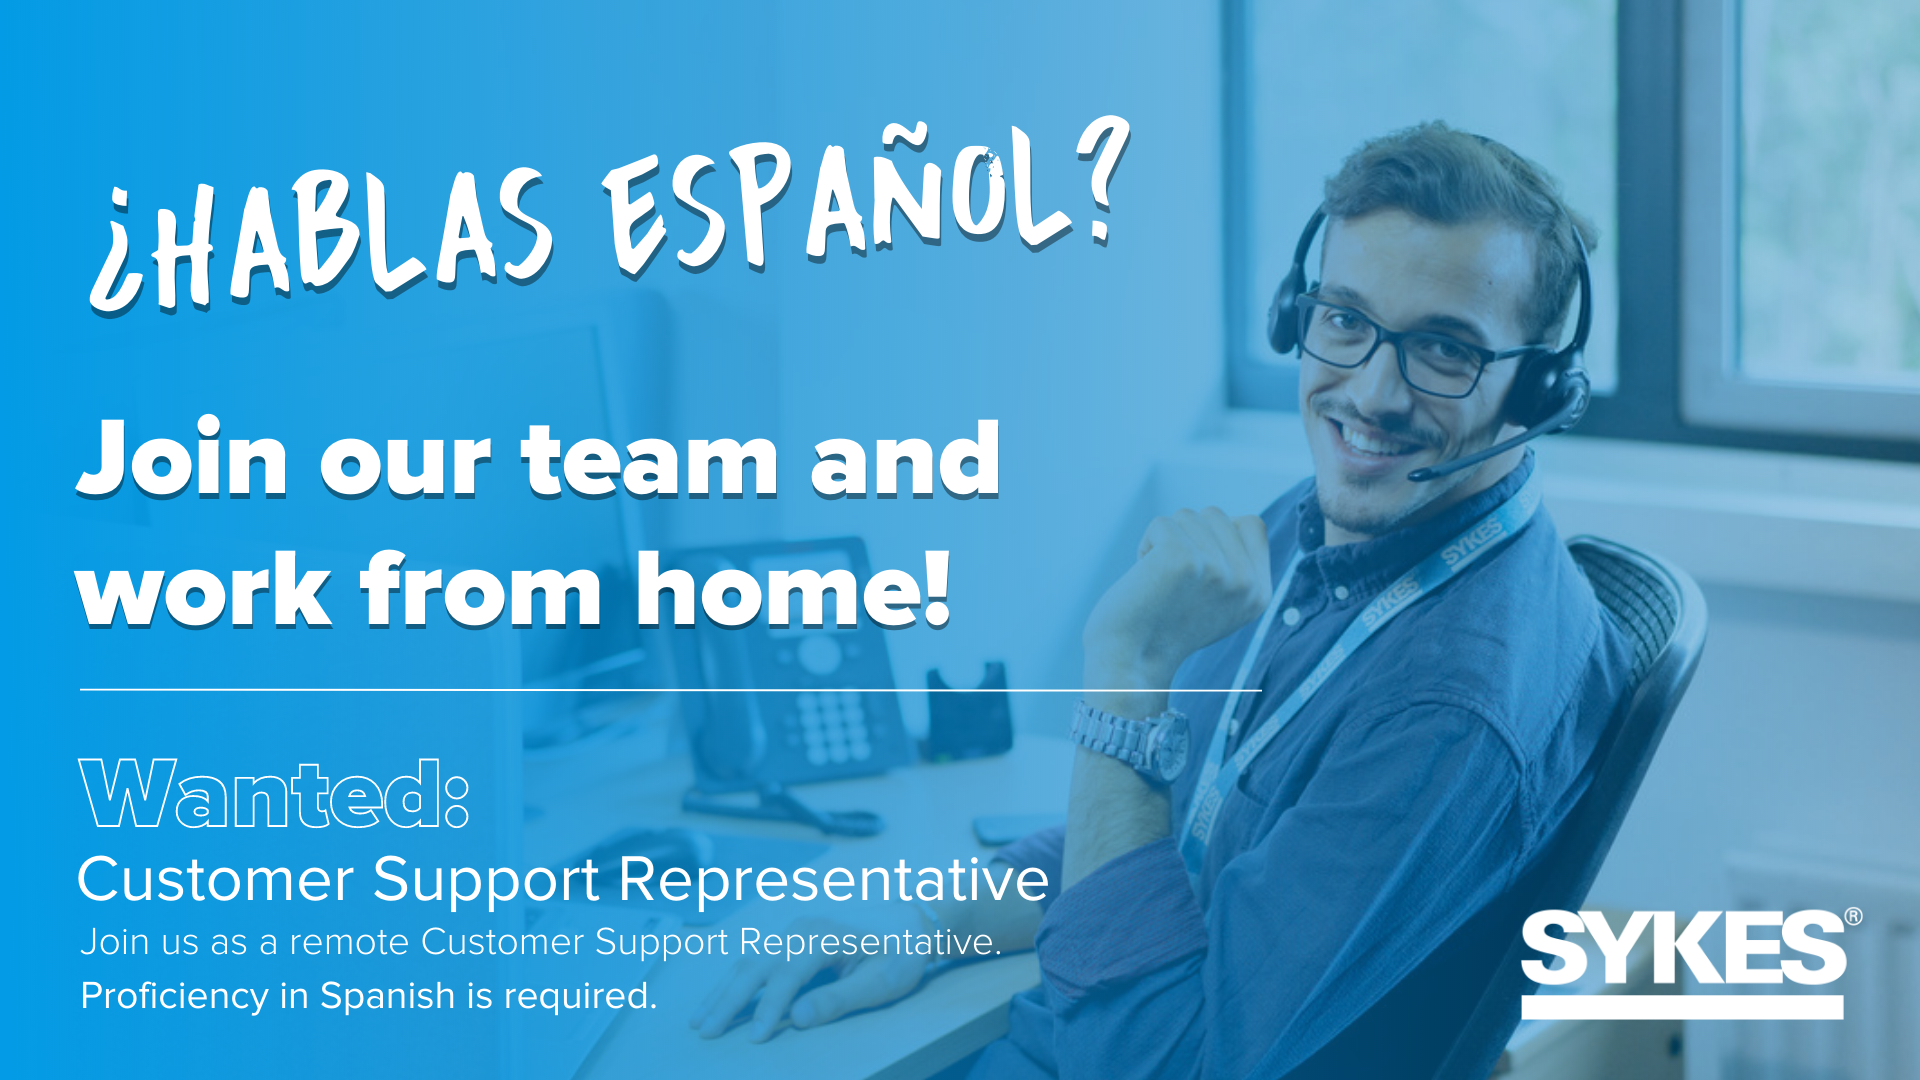 Spanish Speakers - Customer Support [Work at Home]